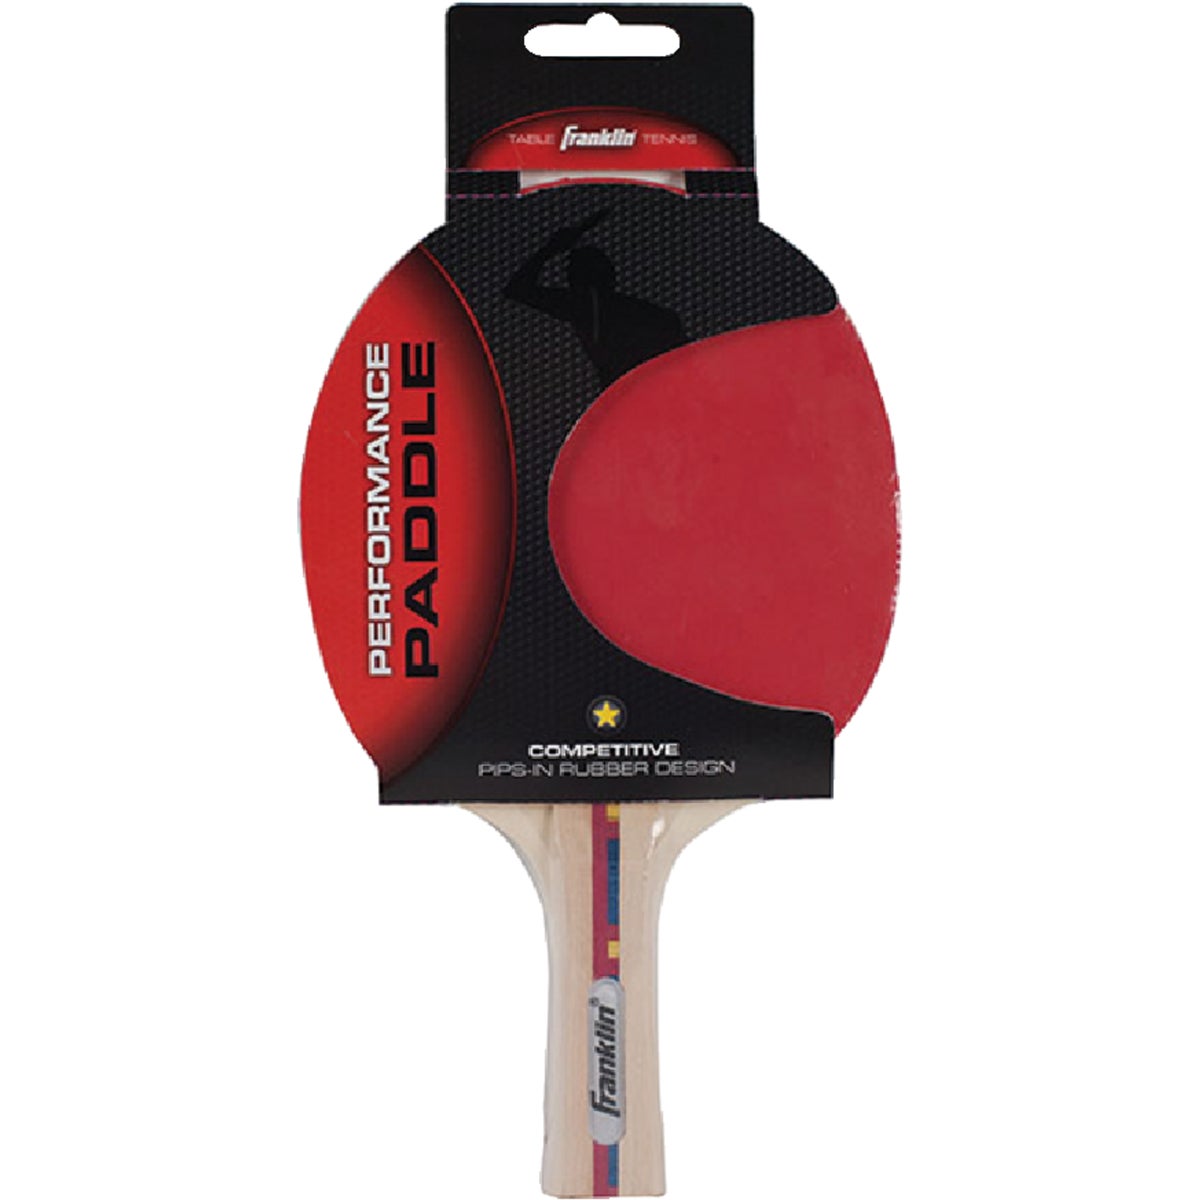 DELX TABLE TENNIS PADDLE